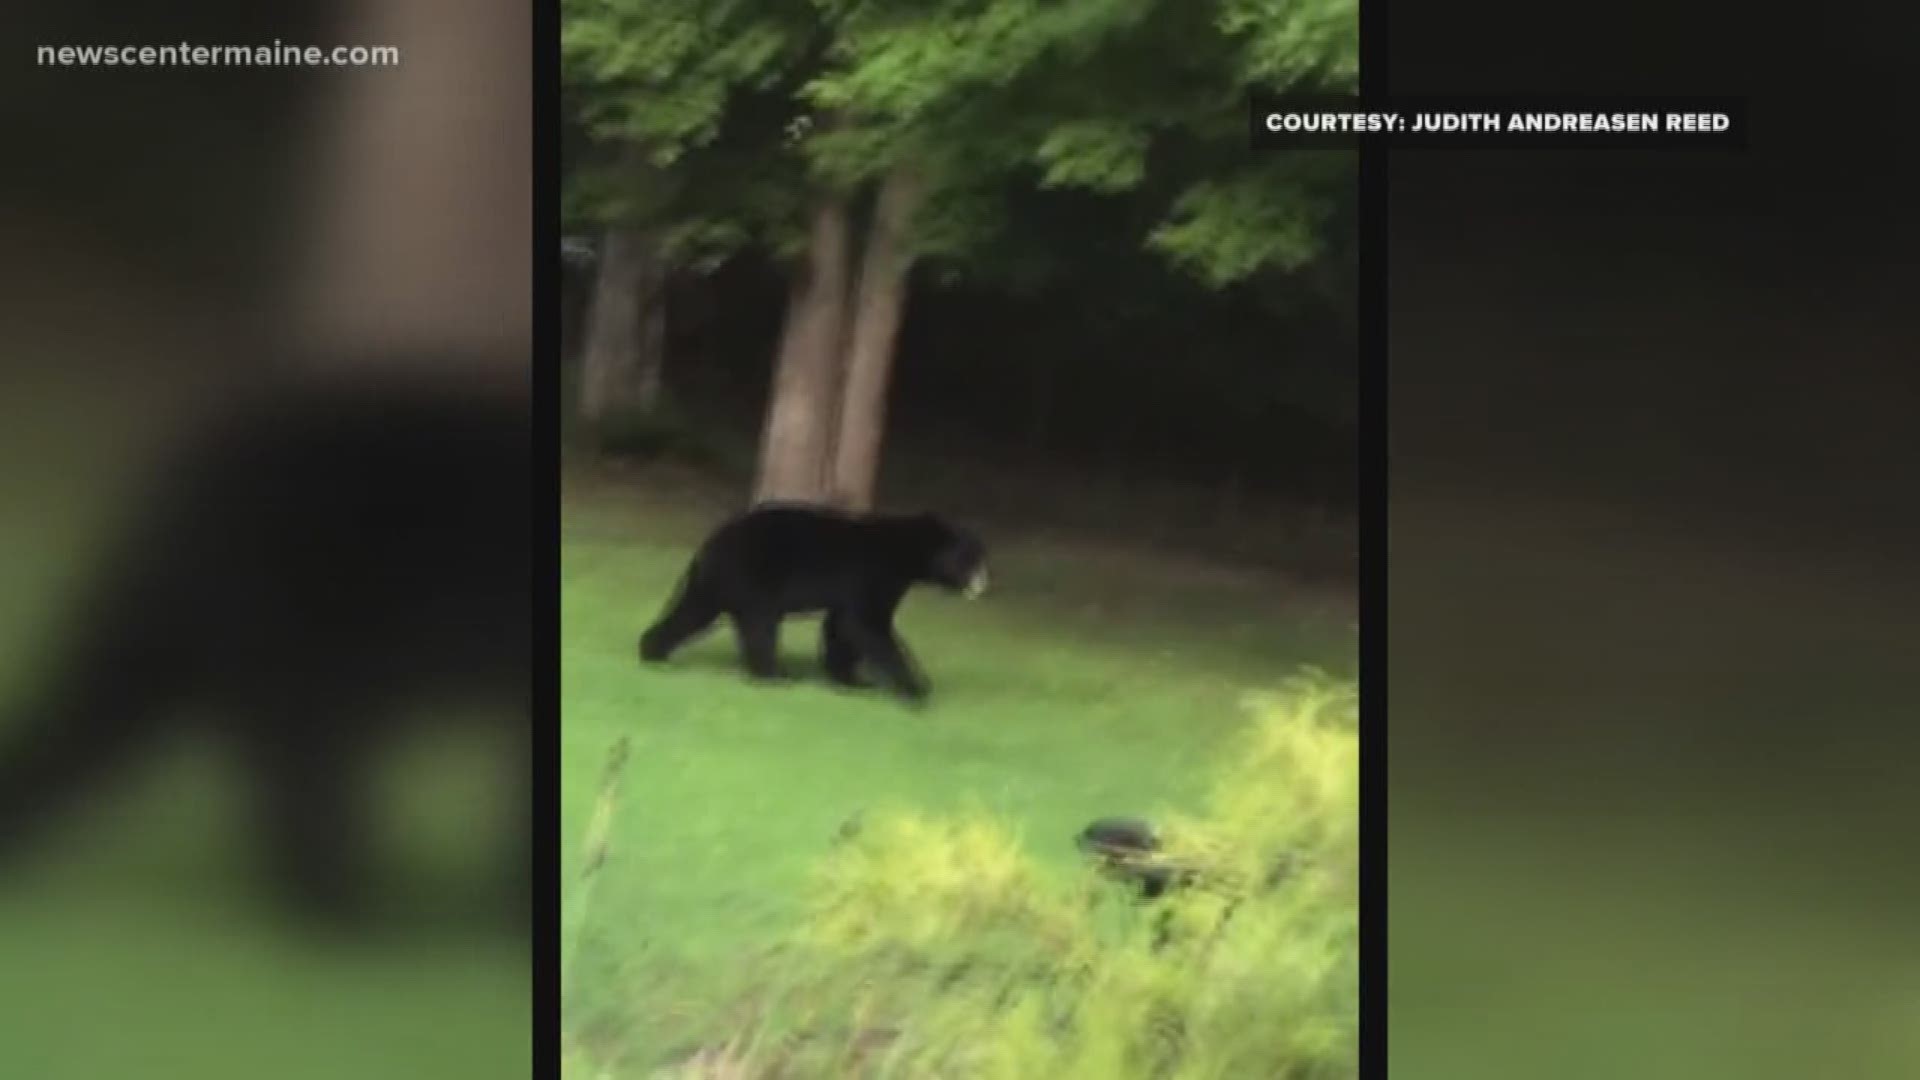 Judith Reed sent this video to us of a black bear in her yard. Reed says the bear has been in her neighborhood for three years.